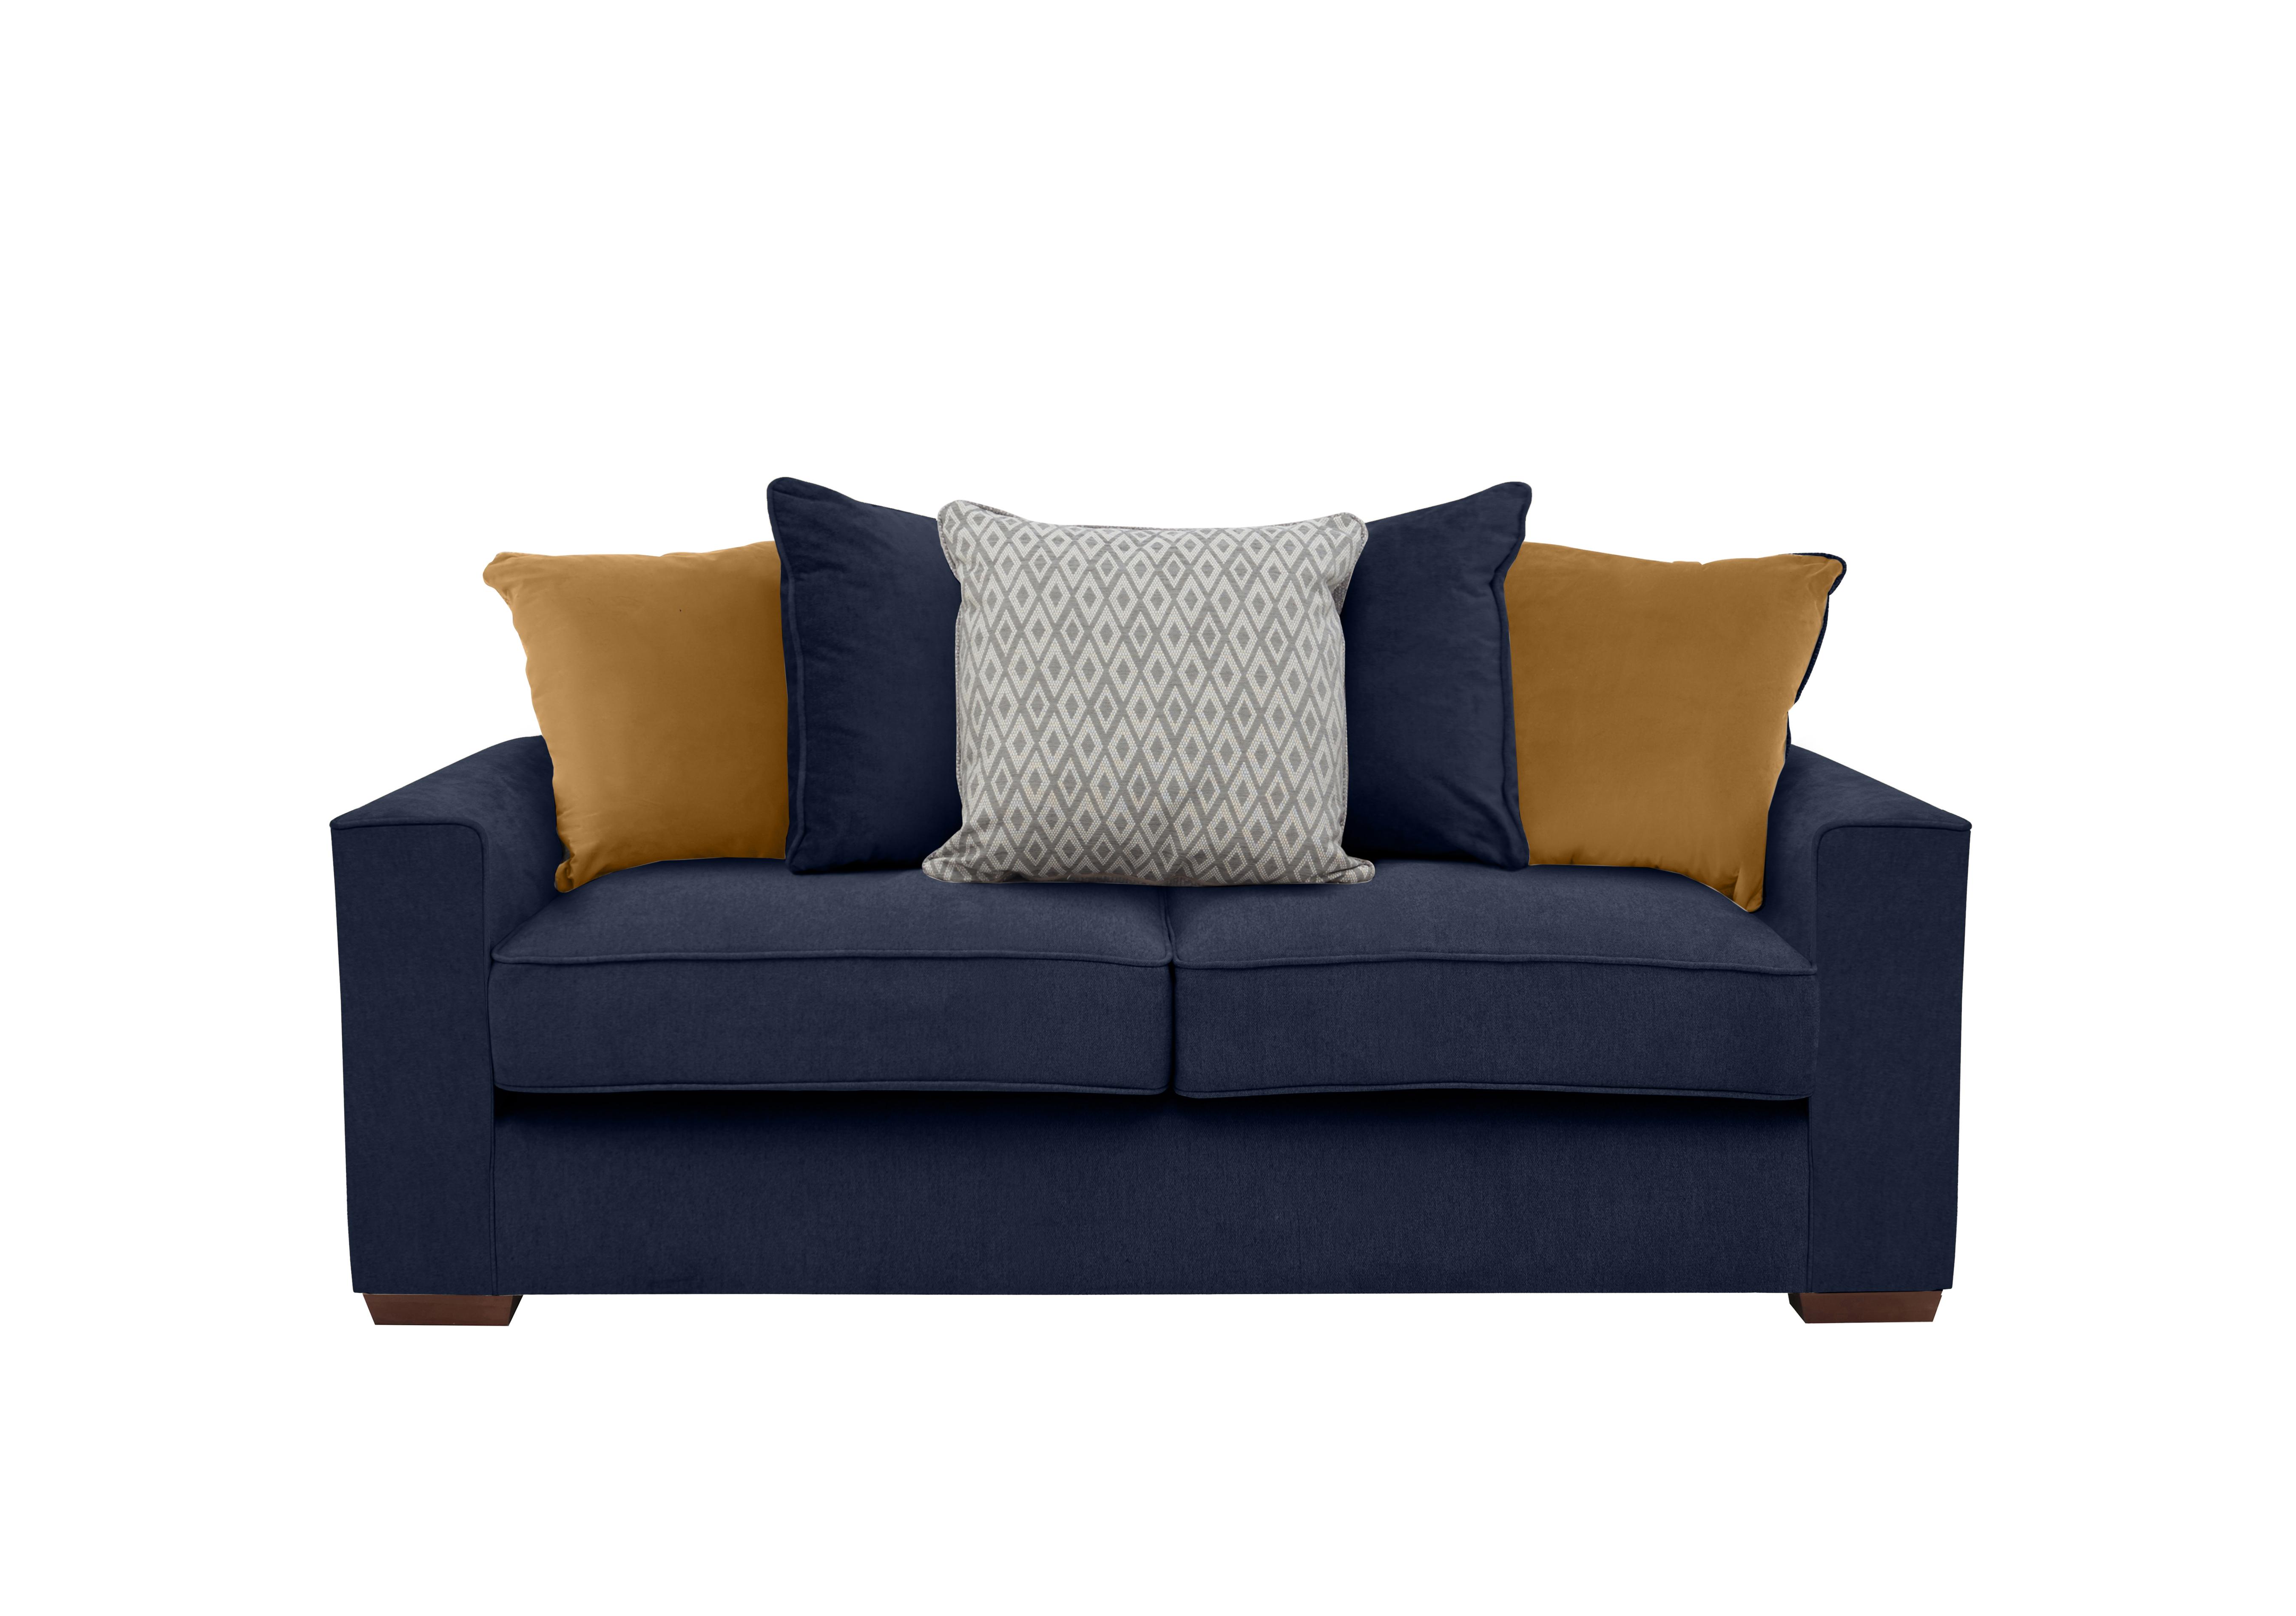 Cory 3 Seater Fabric Scatter Back Sofa in Cosmo Navy Mustard Pack on Furniture Village